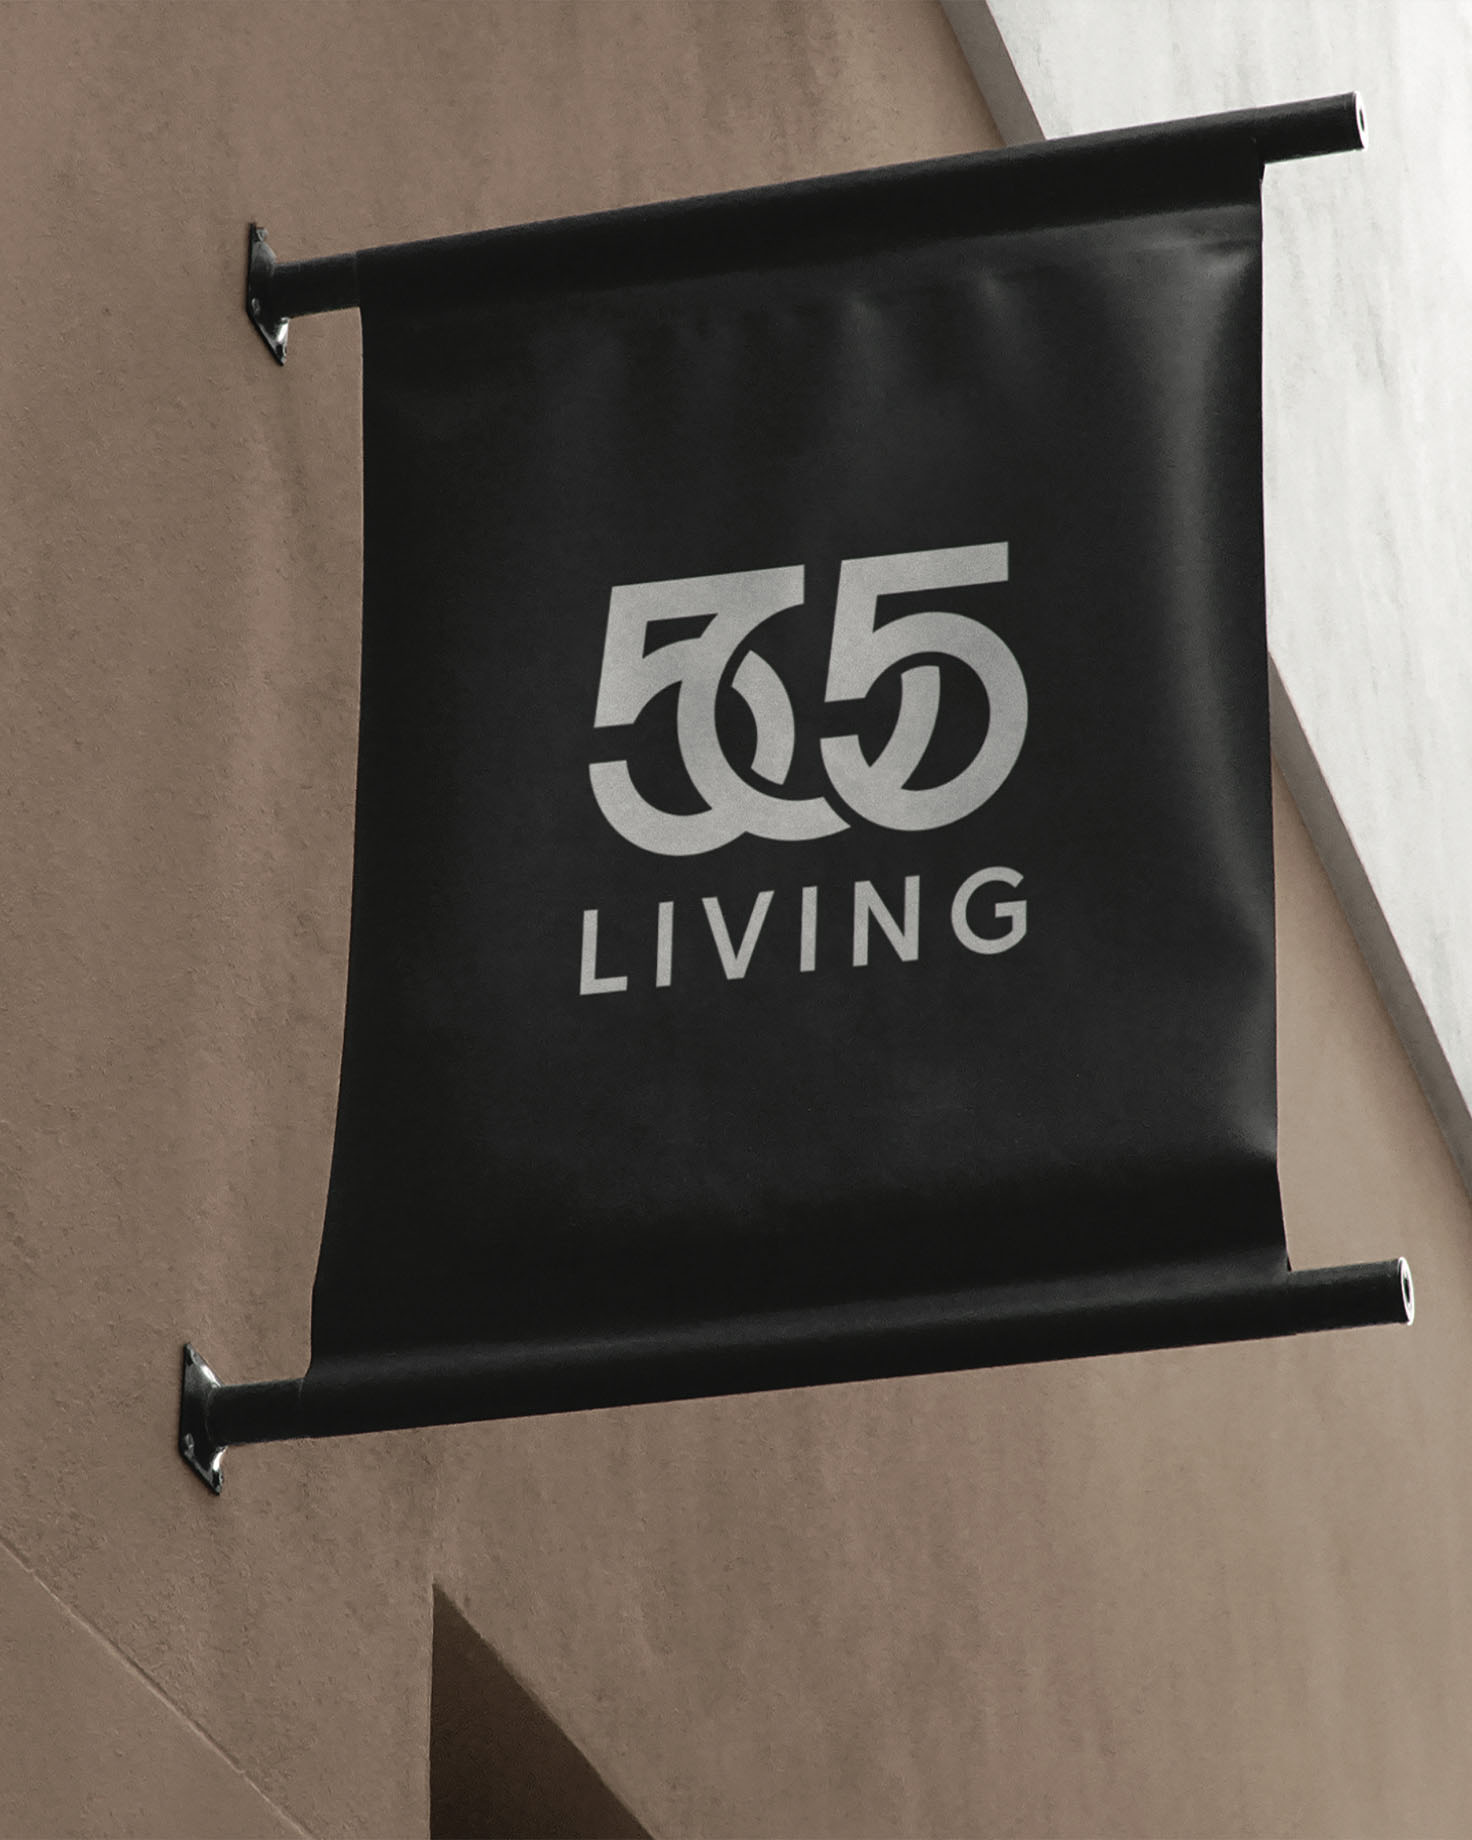 Brand logo signage - 505 Living - Whiskey and Red Small Business Branding and Website Design Packages